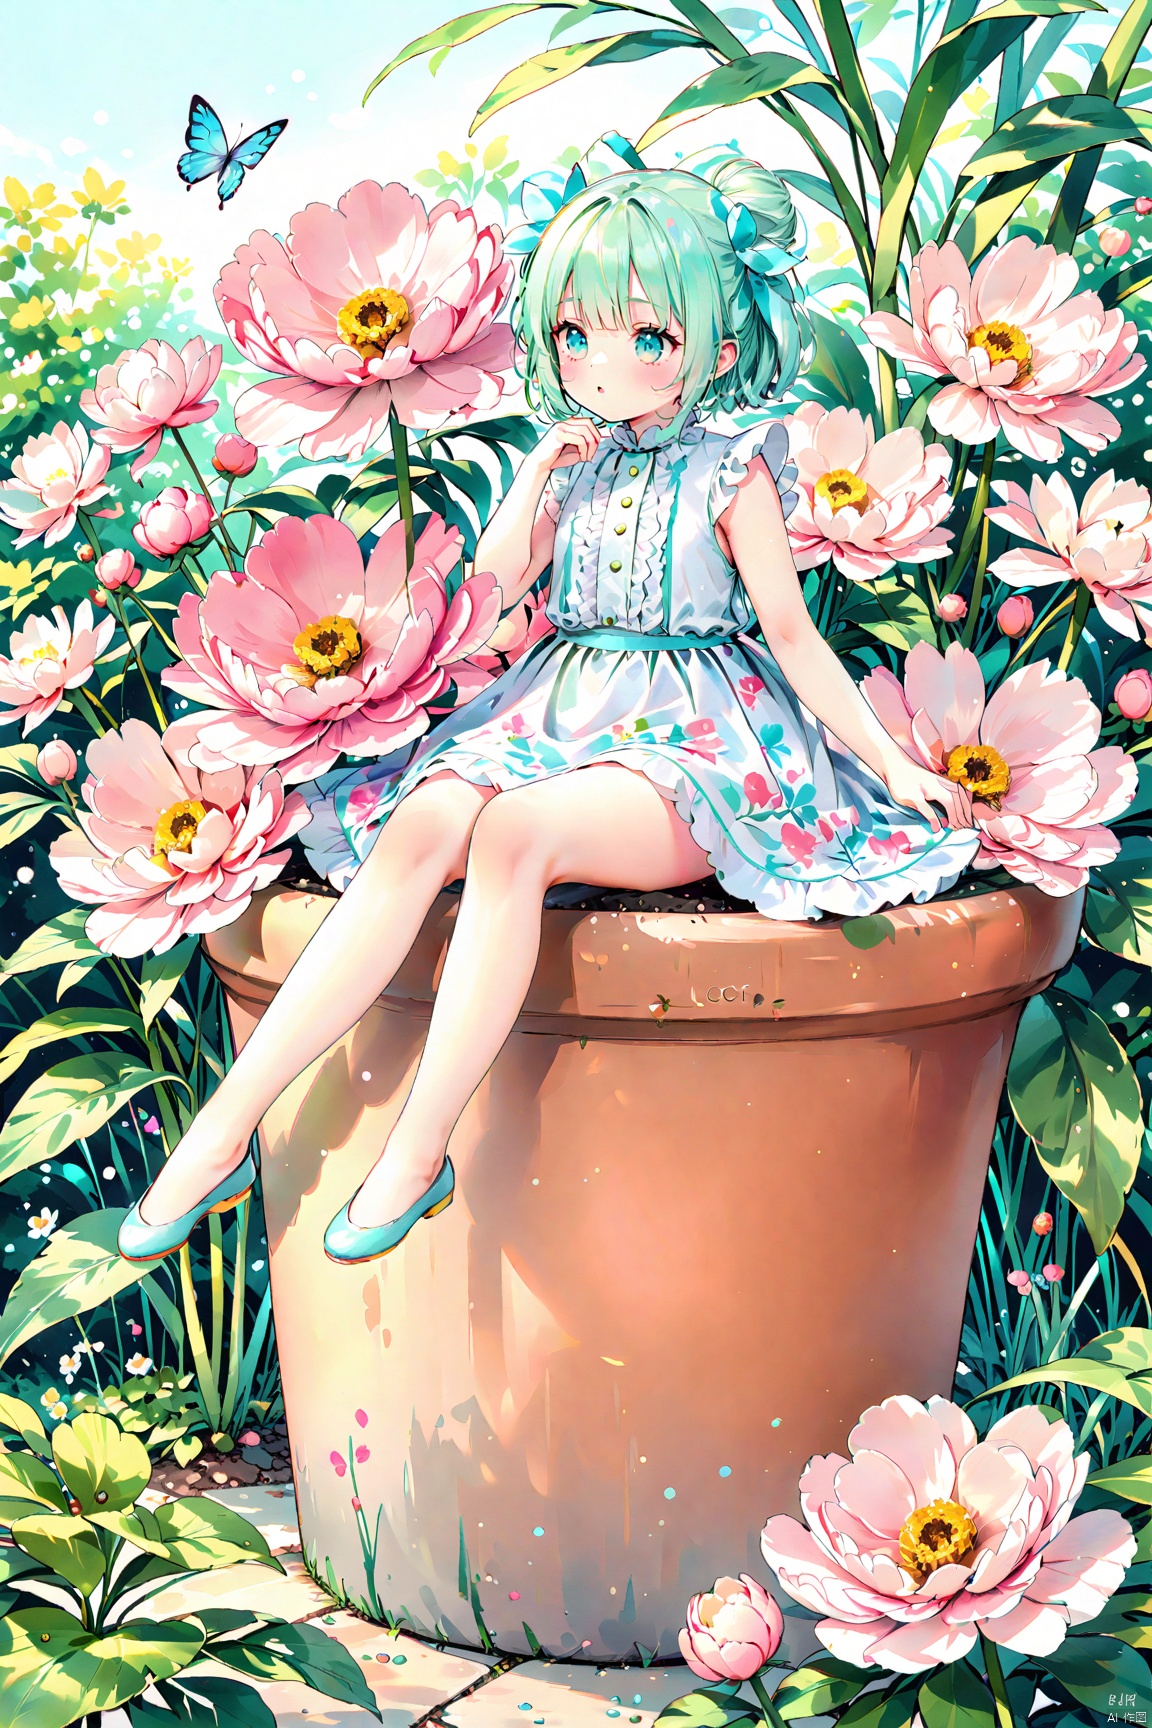  a minigirl sitting on the edge of a plant pot with an oversized flower,butterfly on it,garden,peony,pixie, loli, paleColor, waterM